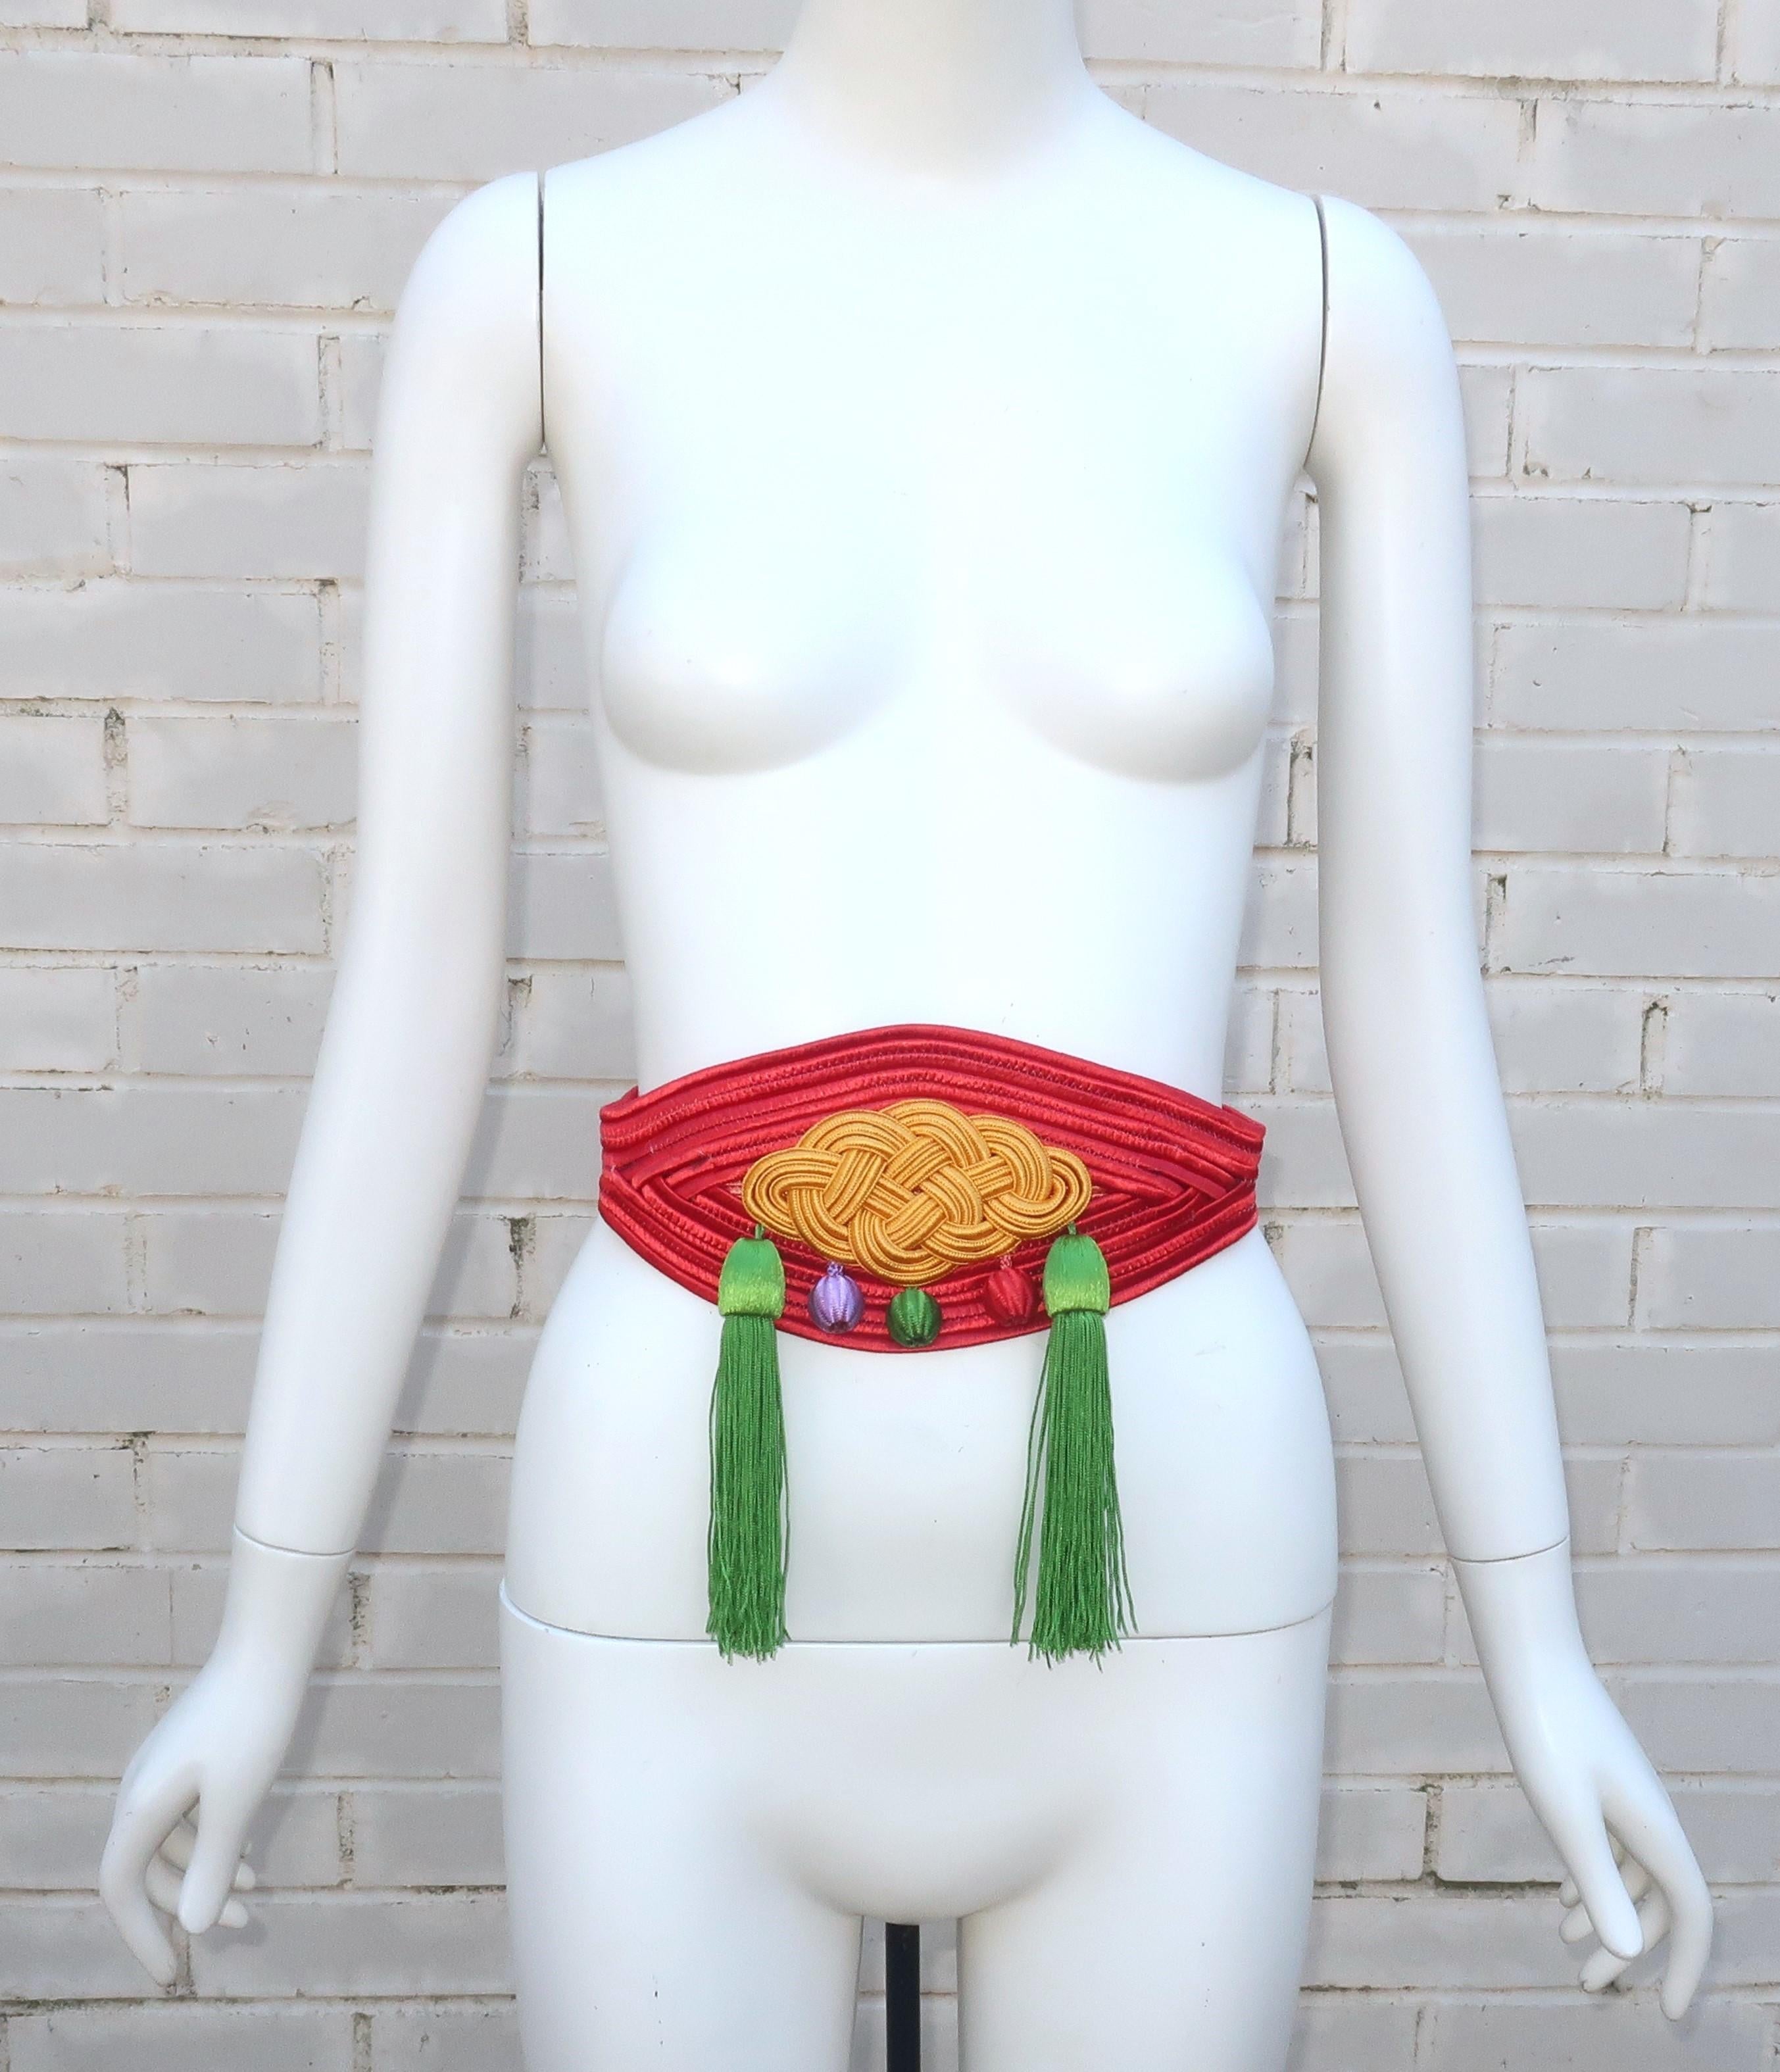 Vintage Yves Saint Laurent cummerbund style belt designed in silk passementerie with tassels. The opulent look is pure YSL with an eye catching combination of colors including red, yellow, green and lilac.  The belt hooks and snaps at the back with